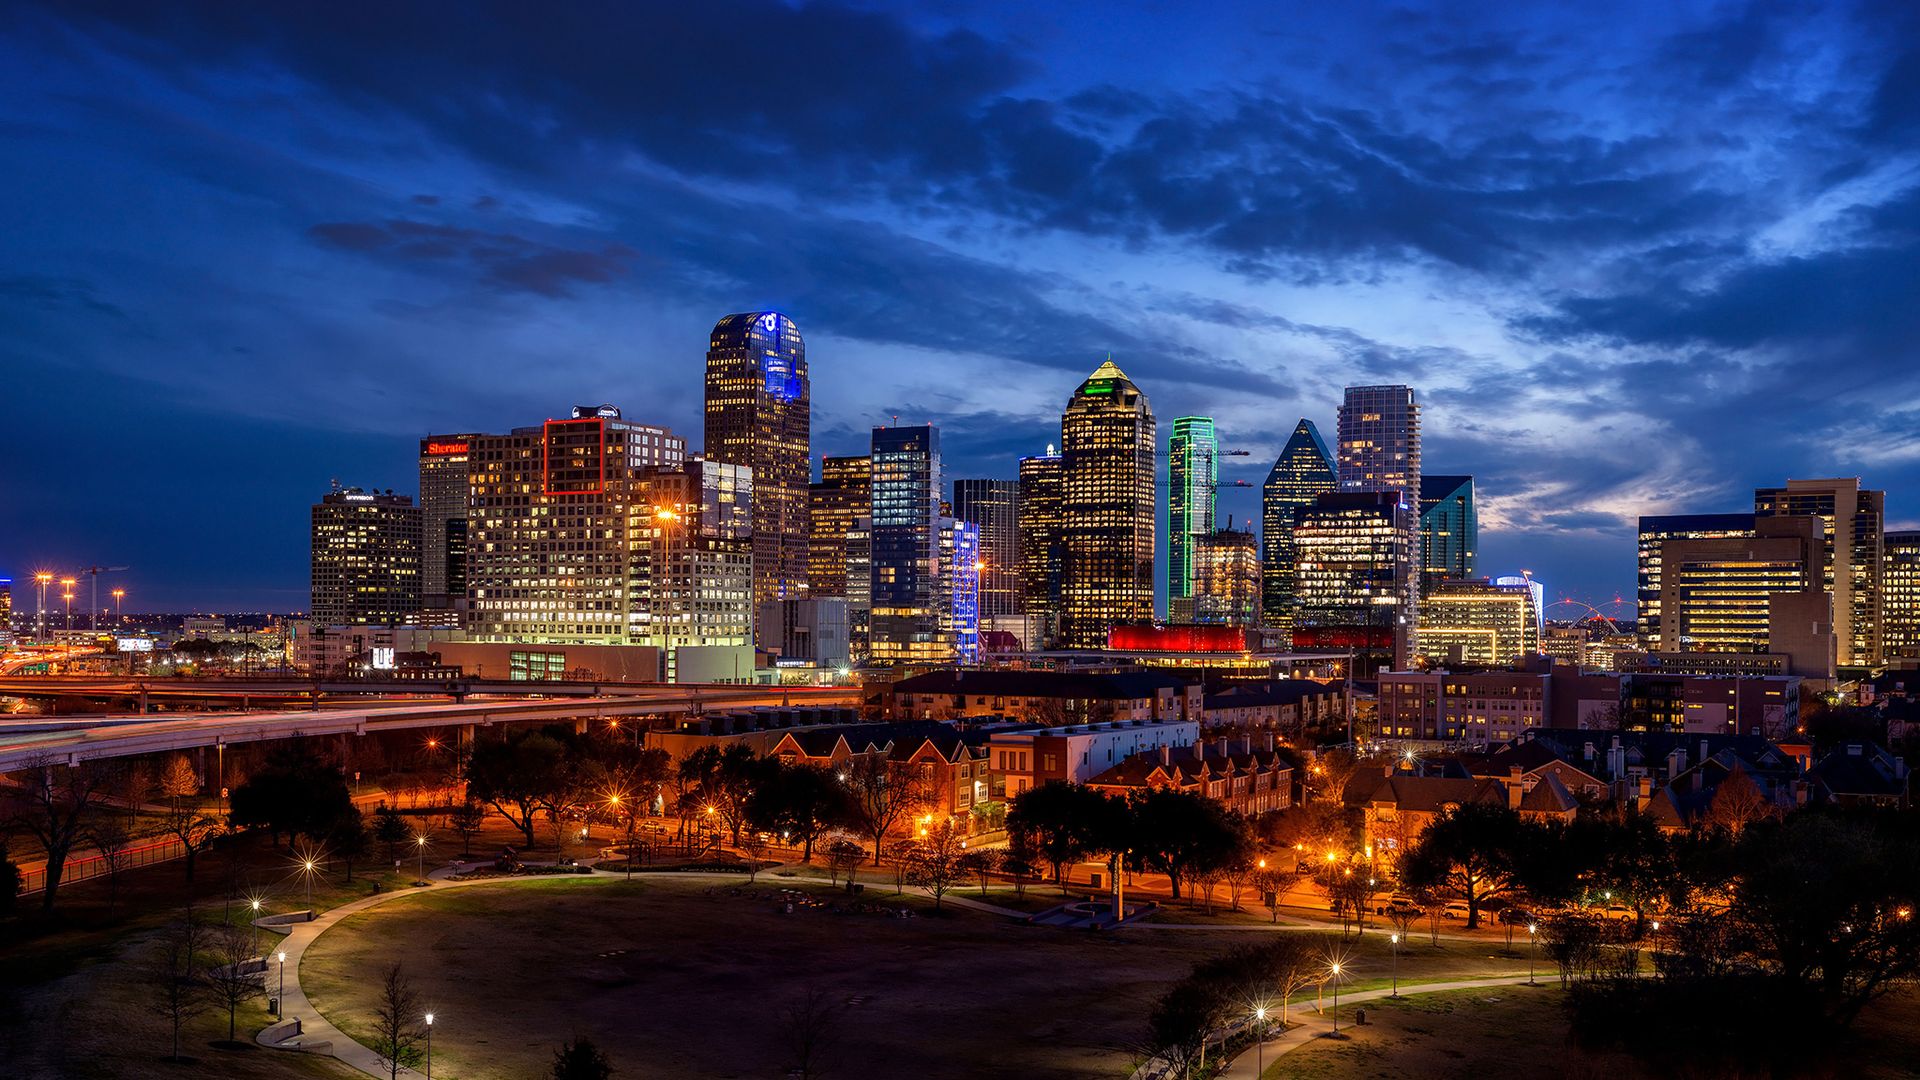 The Dallas skyline bright and glowing against a dramatic darkening sky.